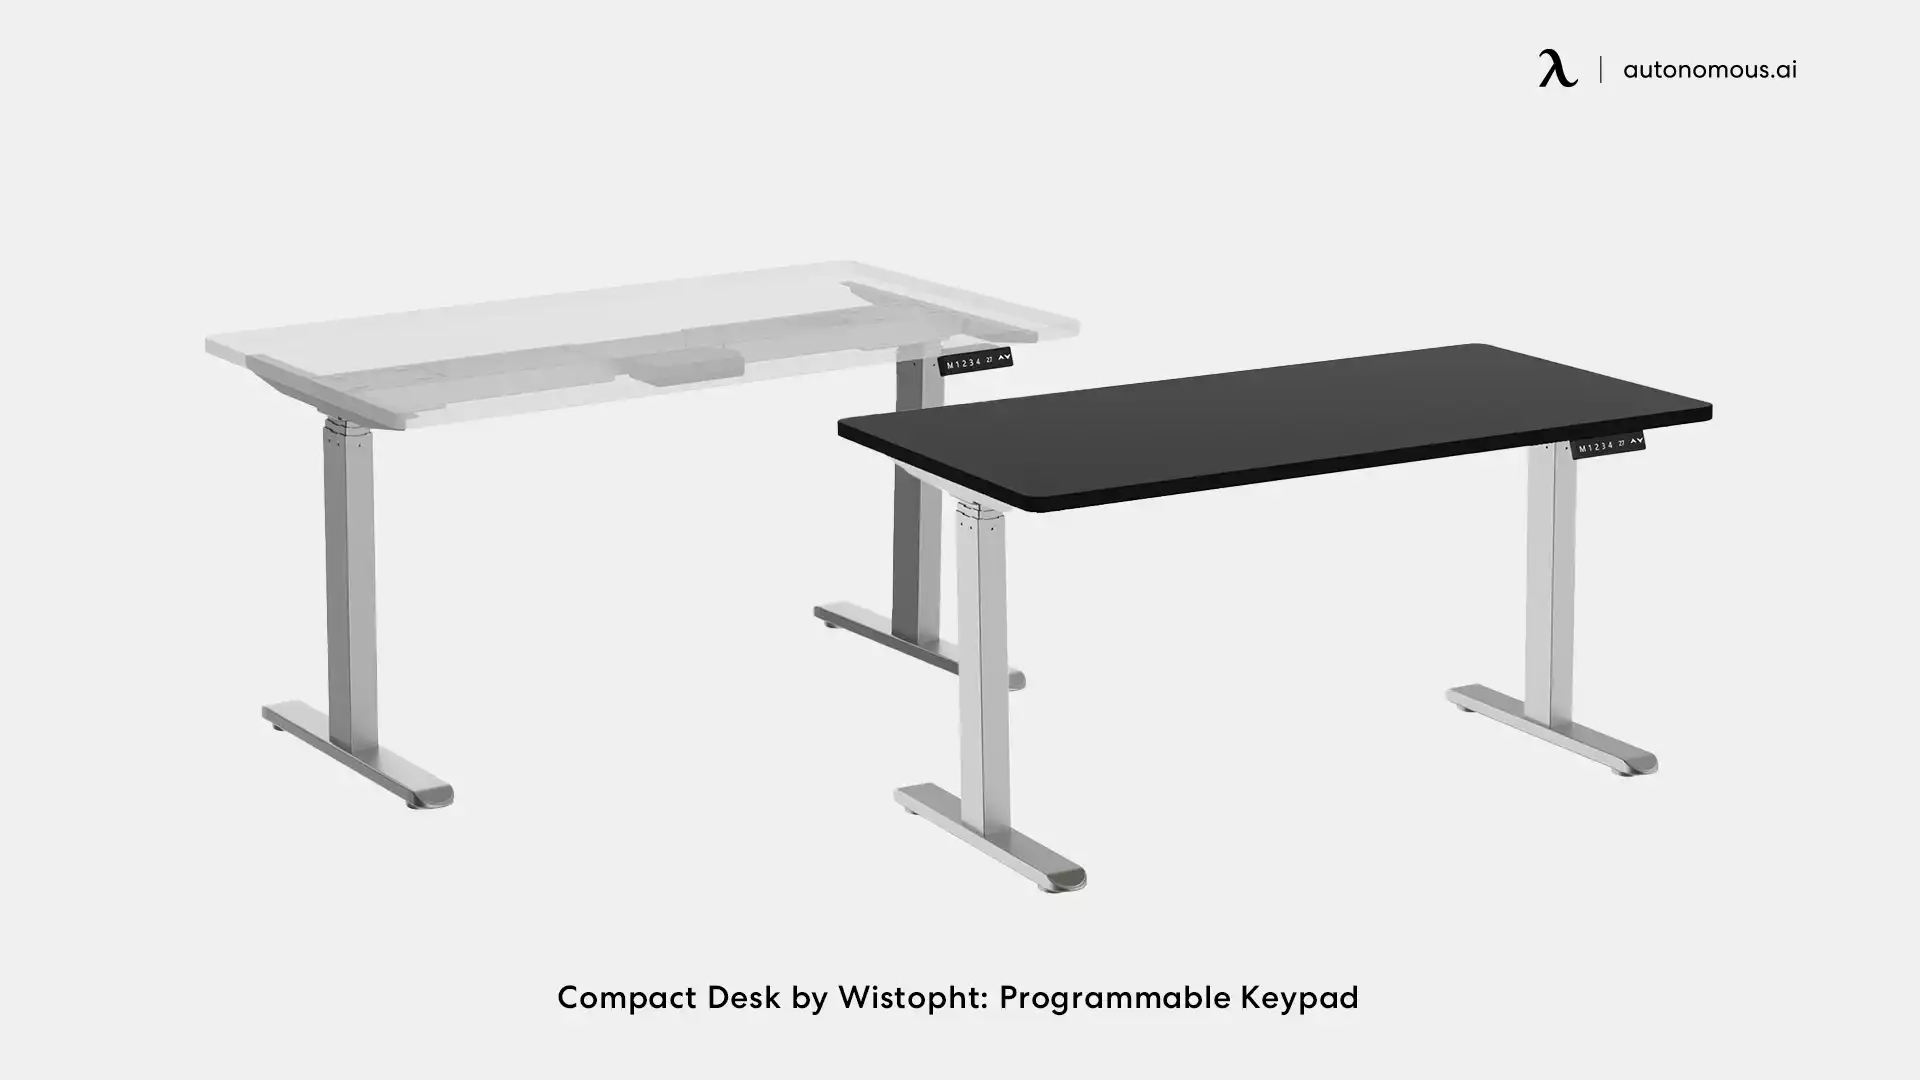 Wistopht's Compact Desk with Programmable Keypad